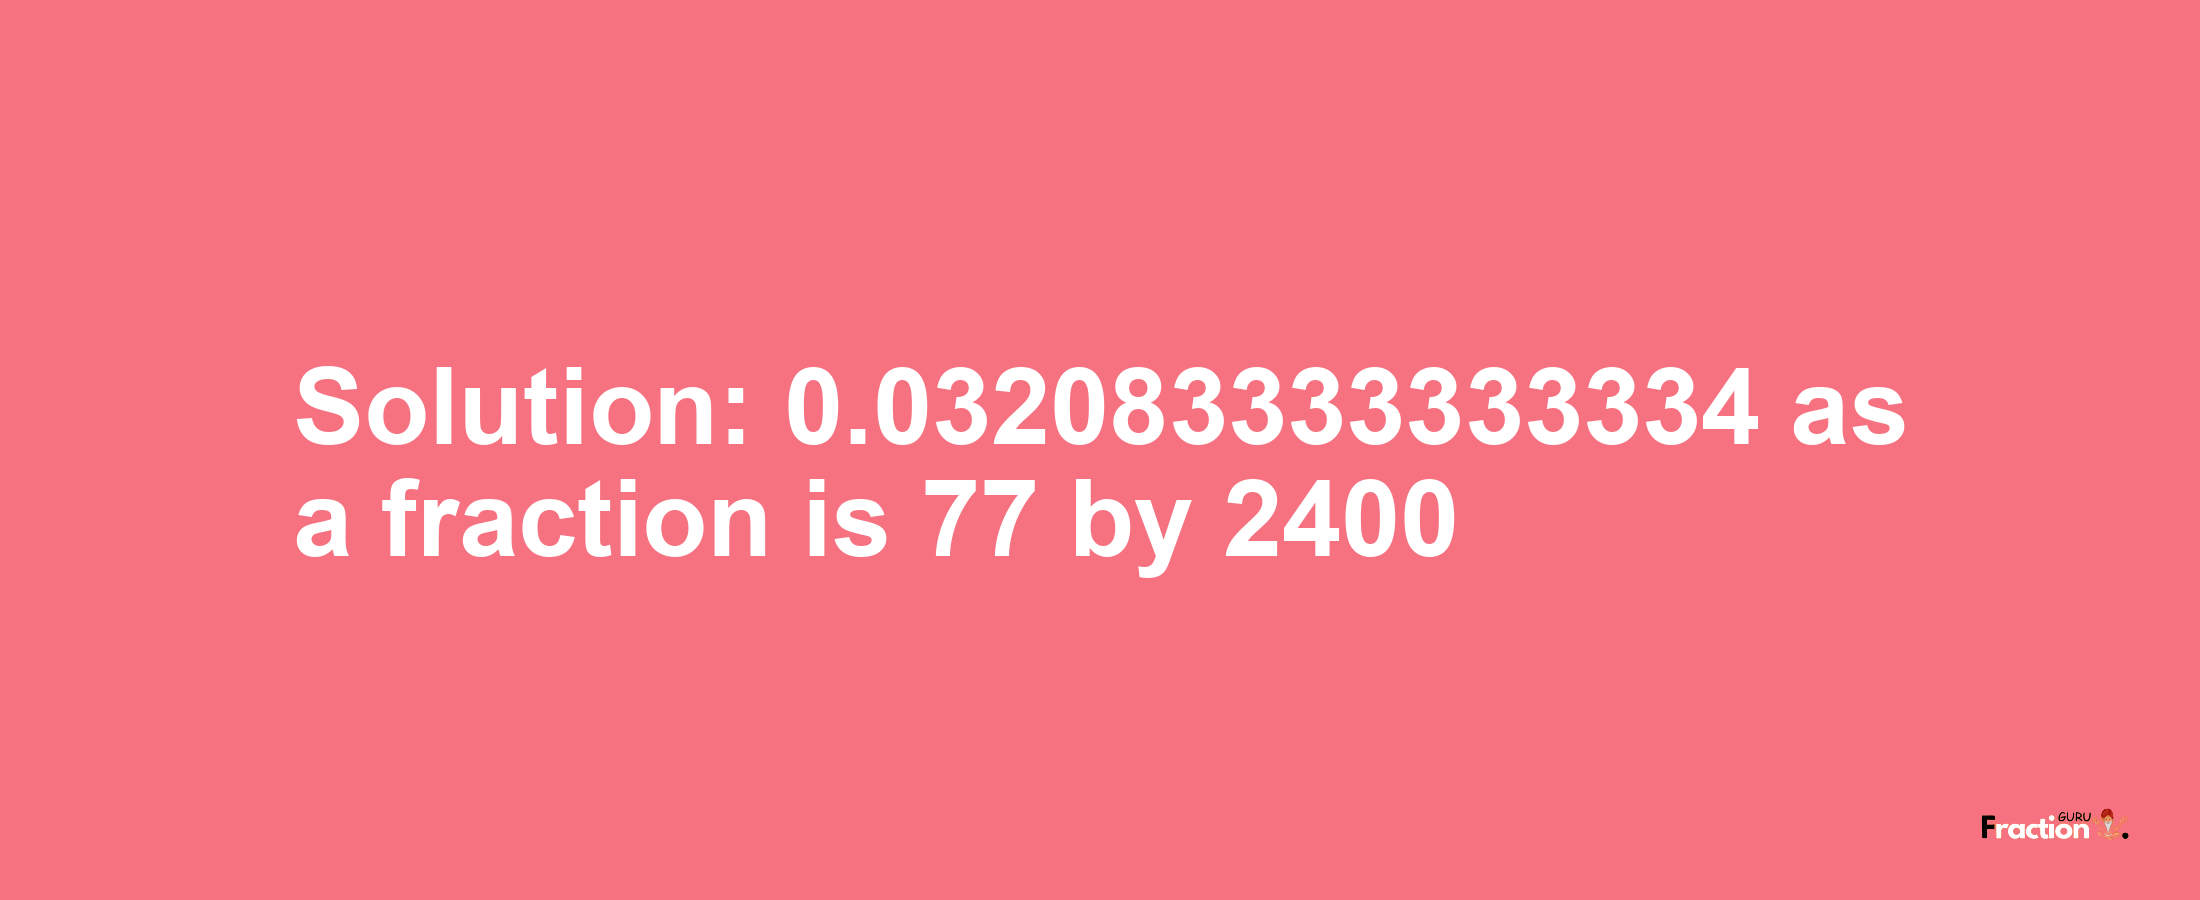 Solution:0.032083333333334 as a fraction is 77/2400